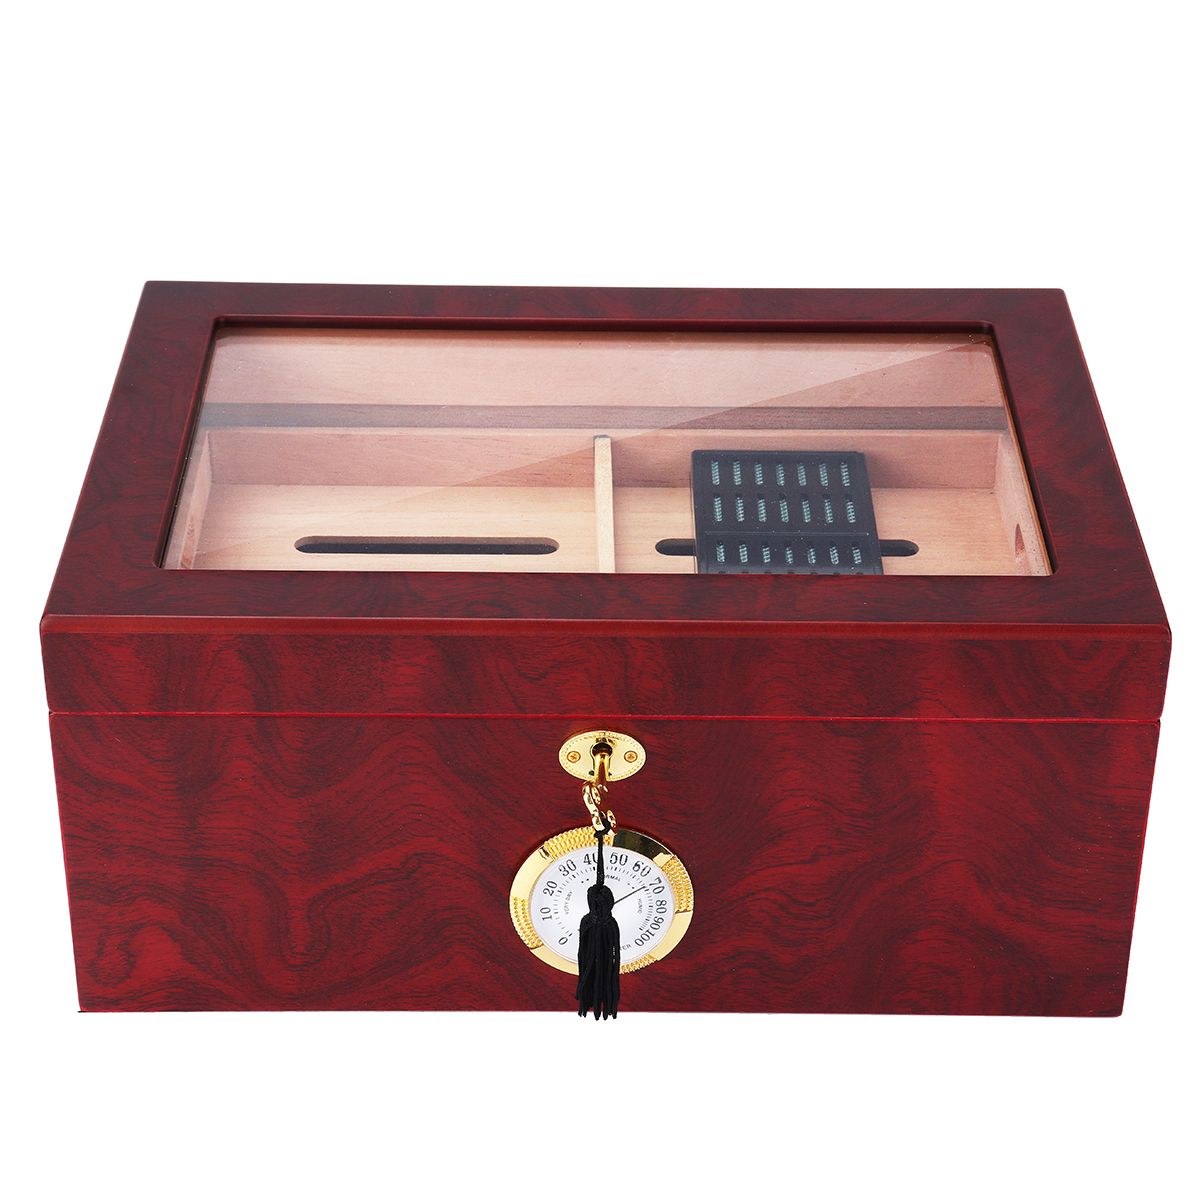 120-Pcs-Wooden-Grain-Humidifier-Storage-Box-Case-With-Lockstitch-Transparent-Display-Window-Double-L-1420573